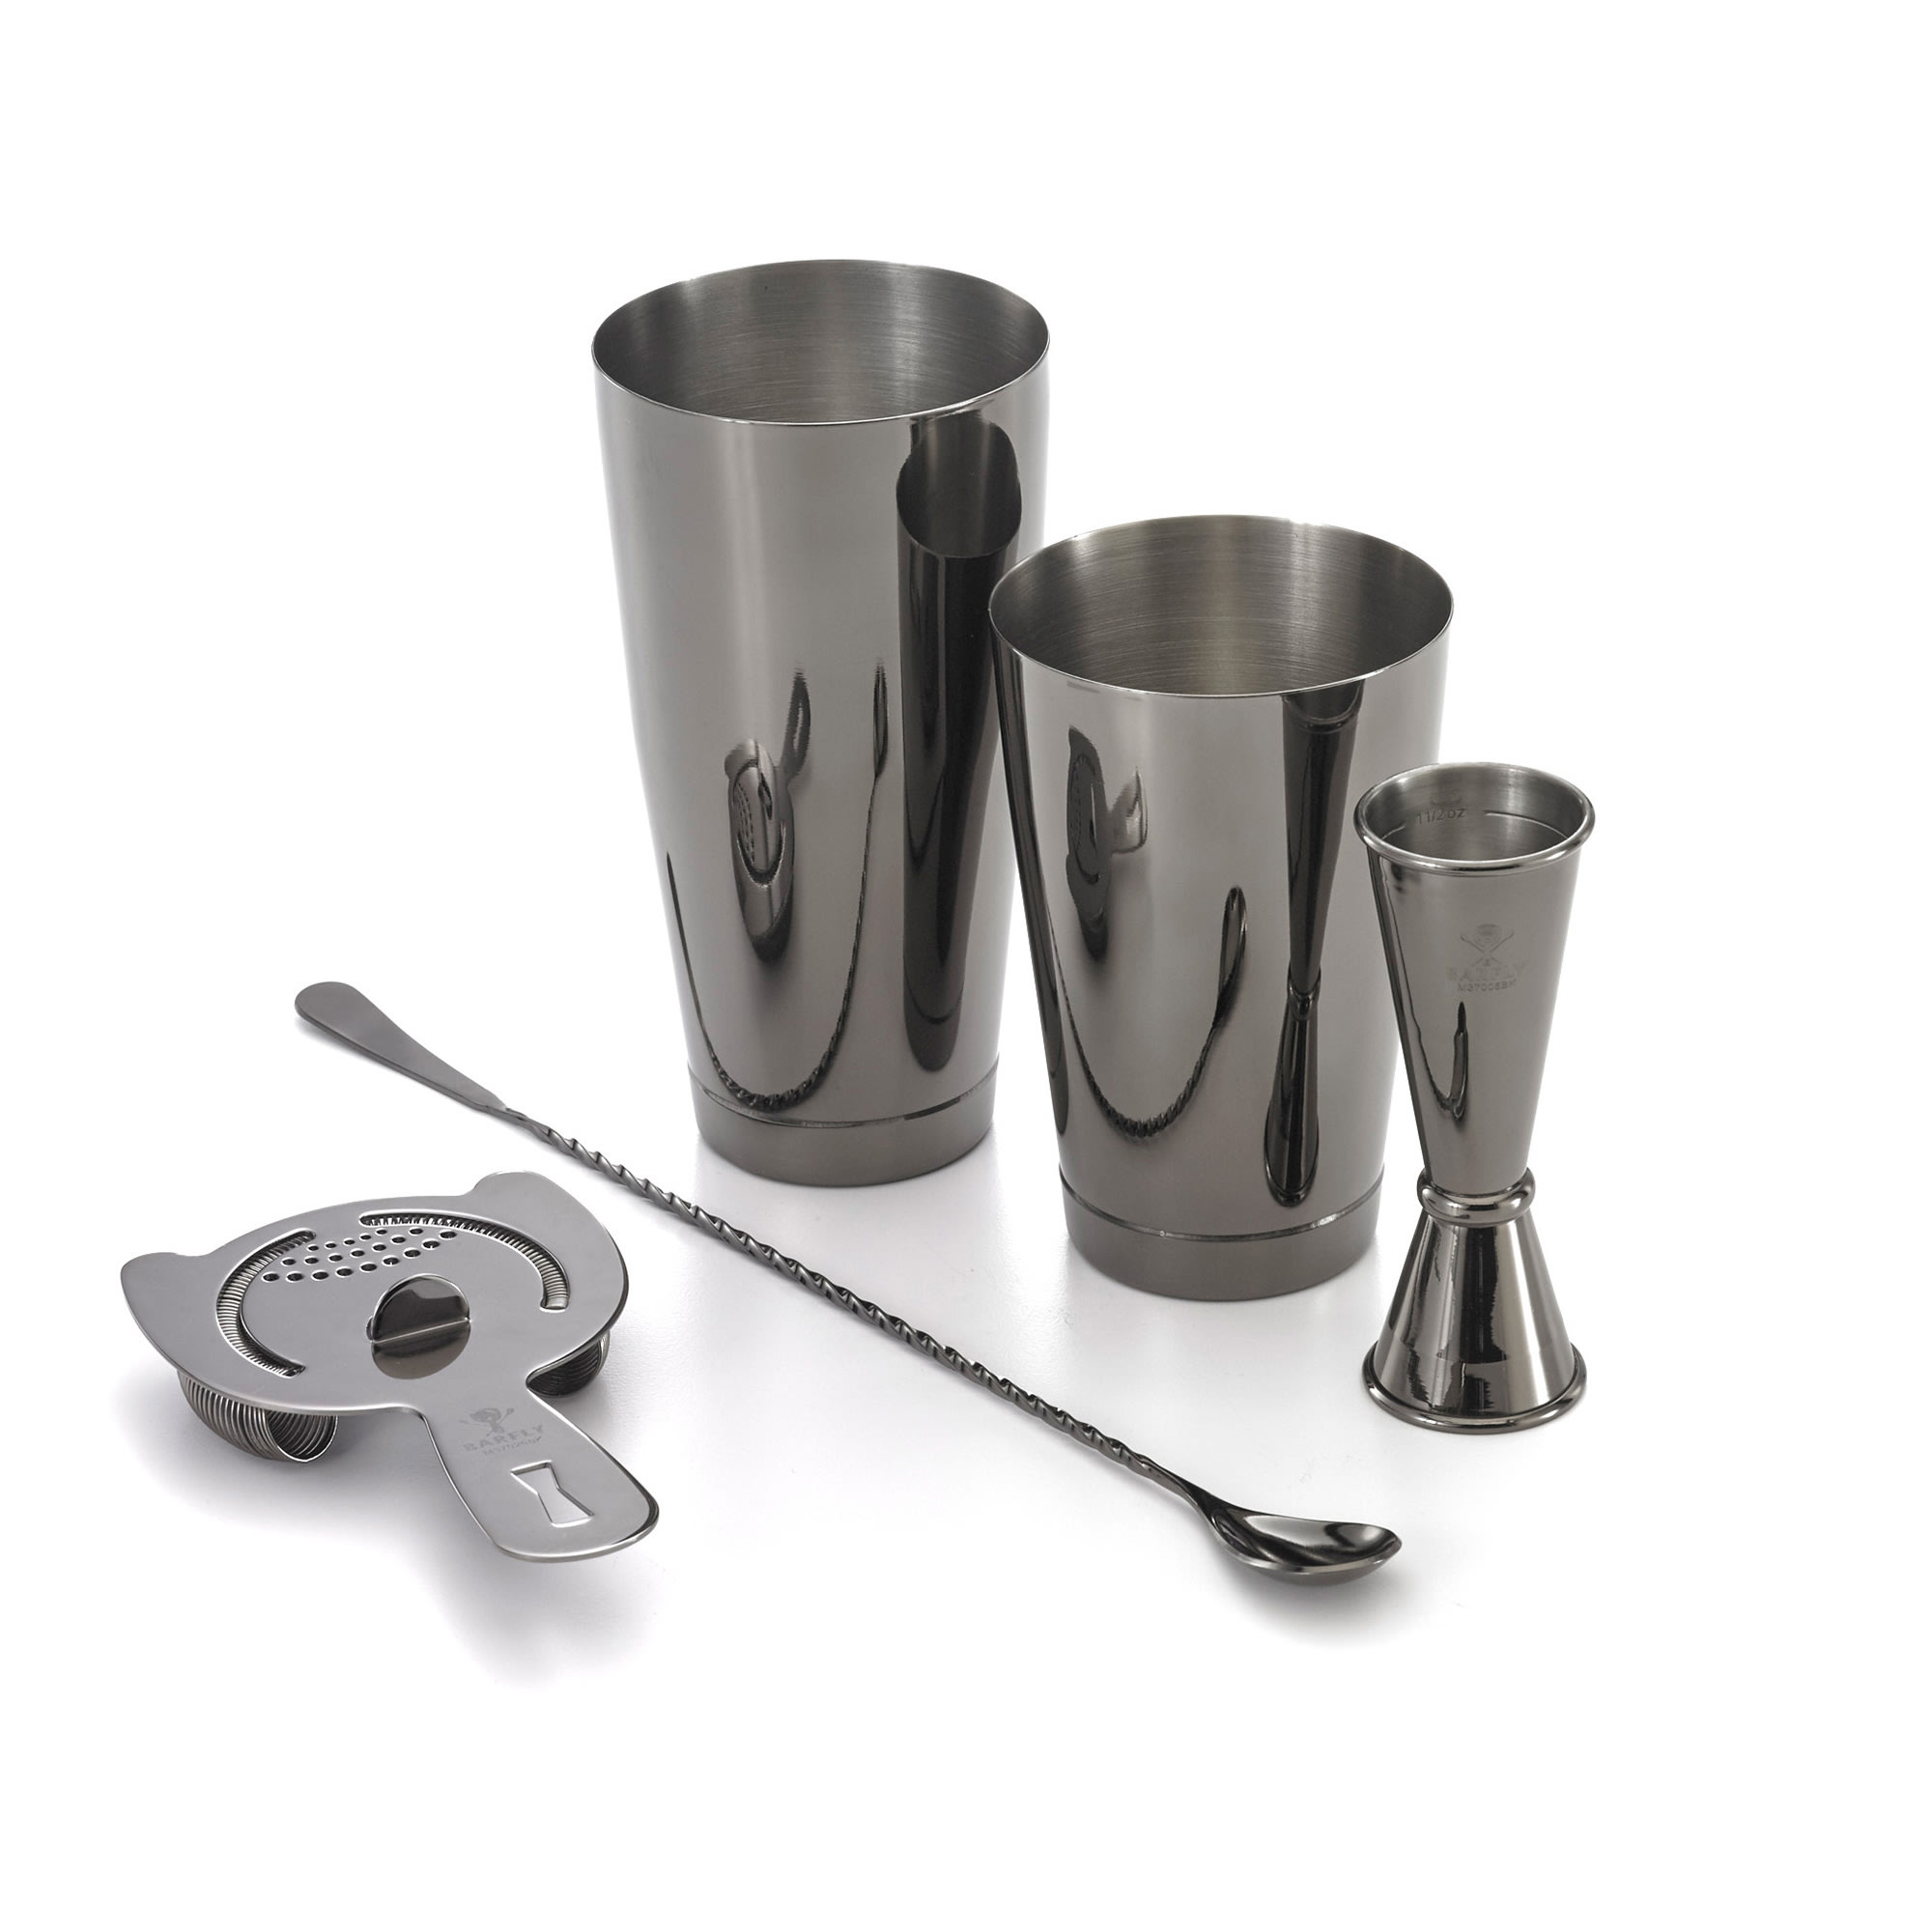 COPPER-PLATED COCKTAIL KIT 8 PIECE - Core Catering